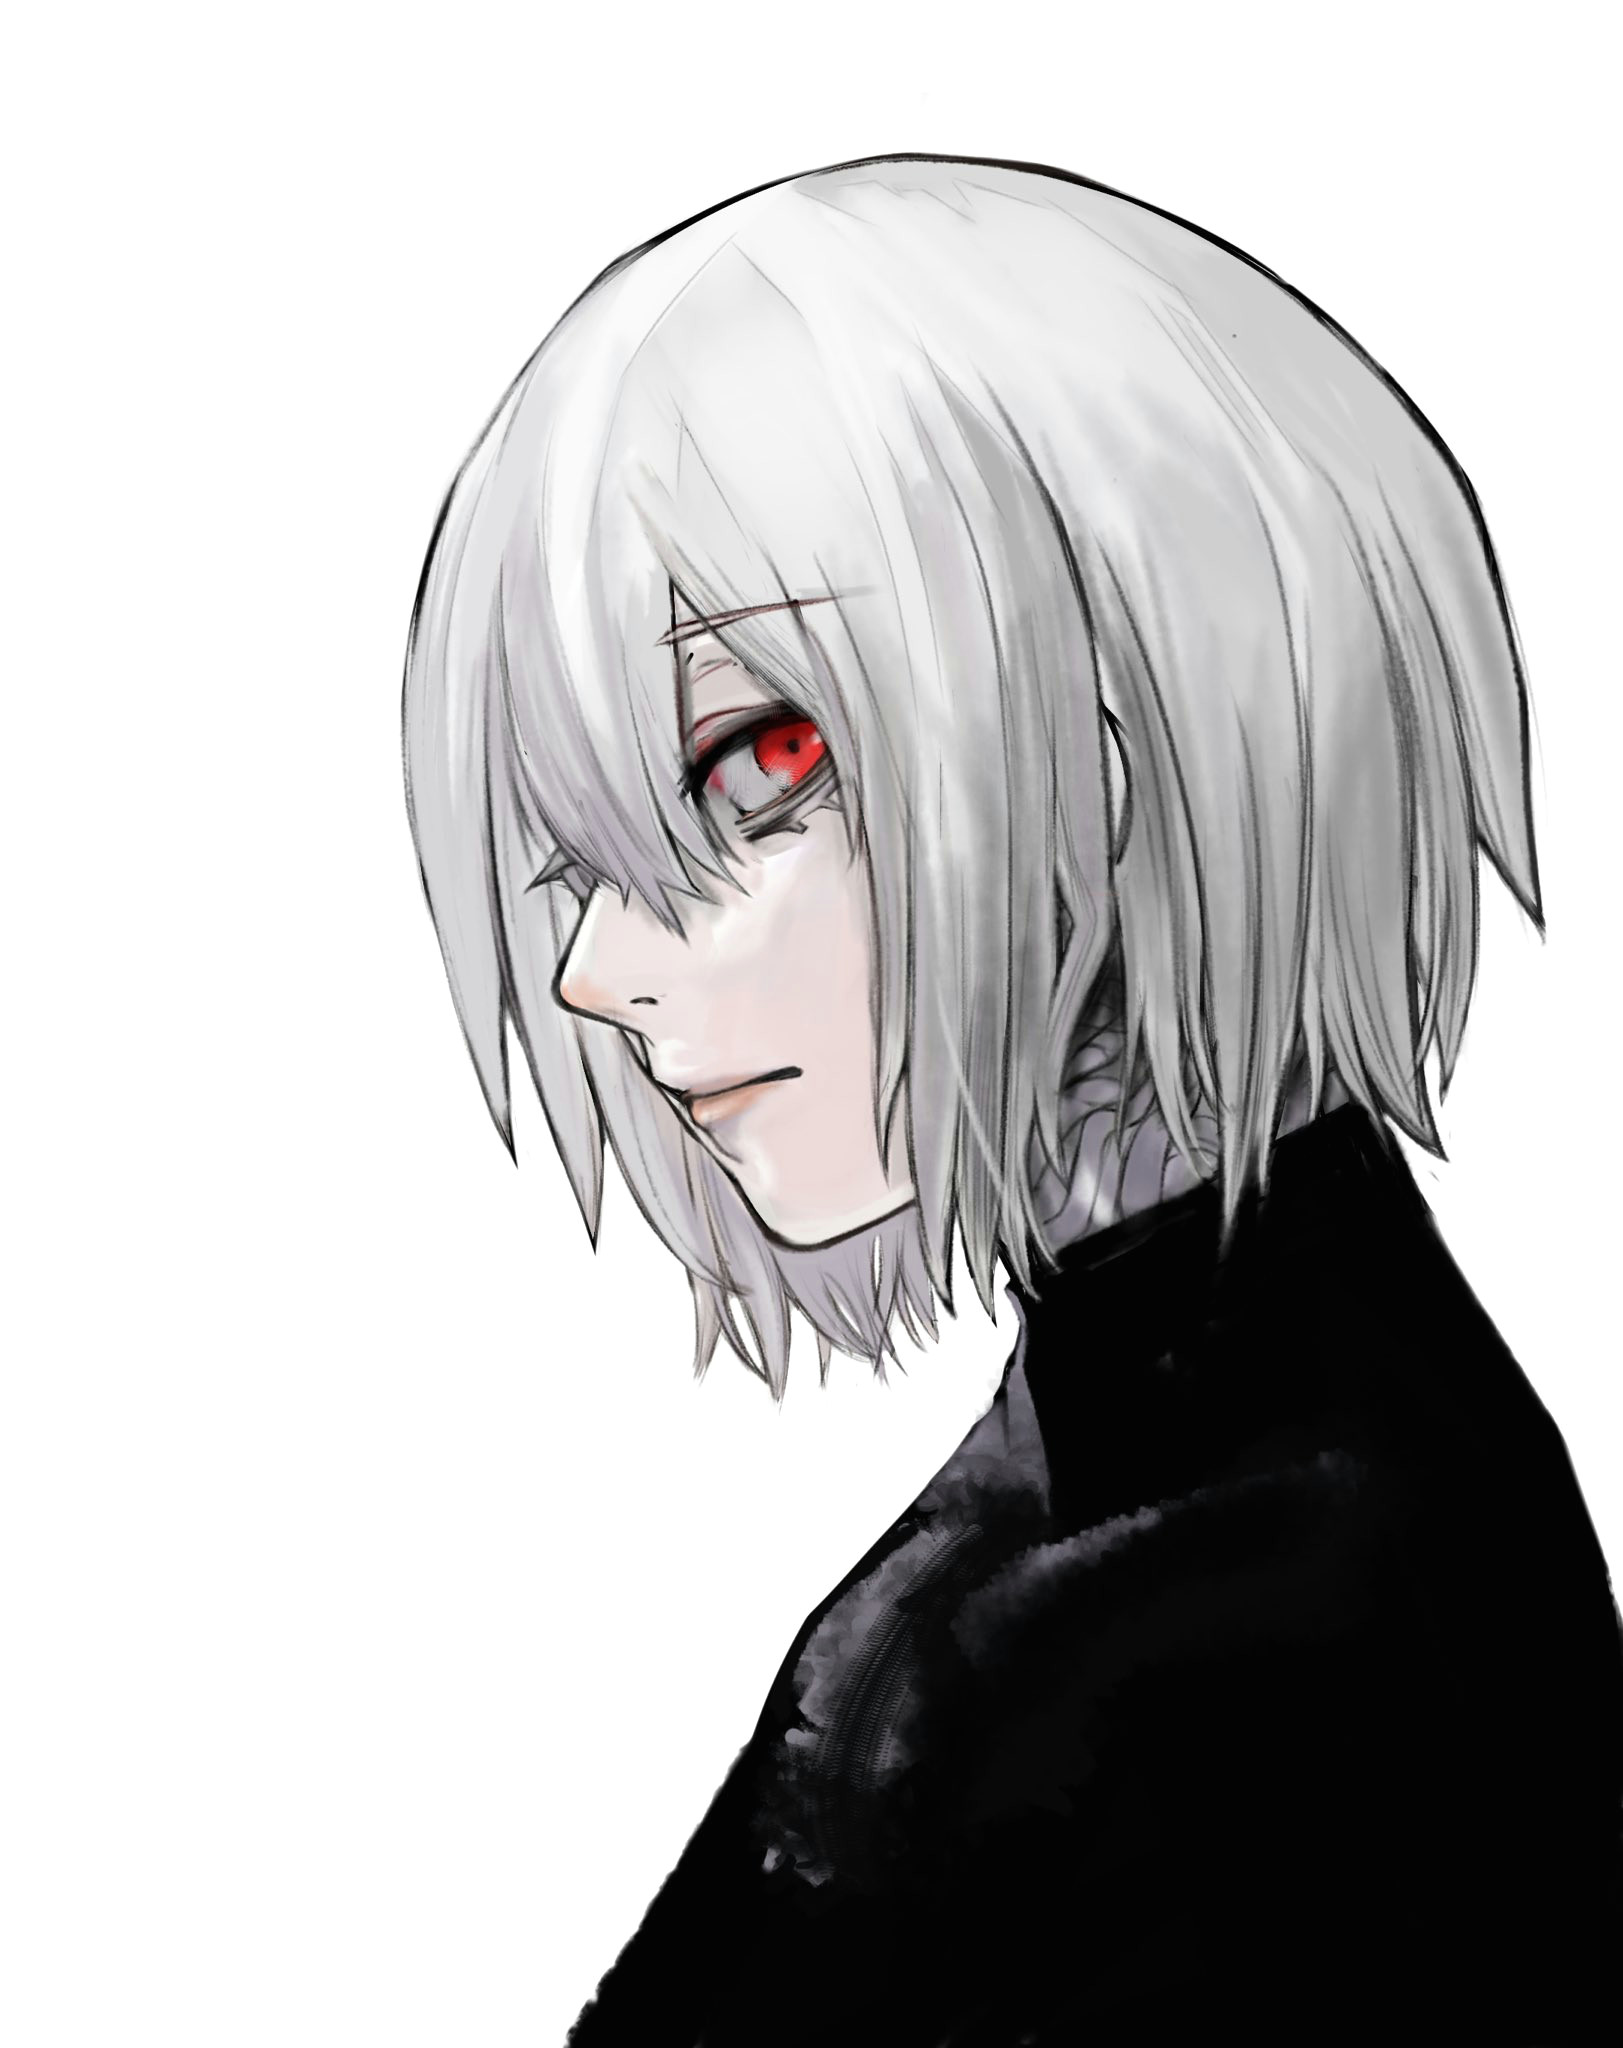 pin by nhao t ta n on kanekk kend pinterest tokyo ghoul tokyo and anime